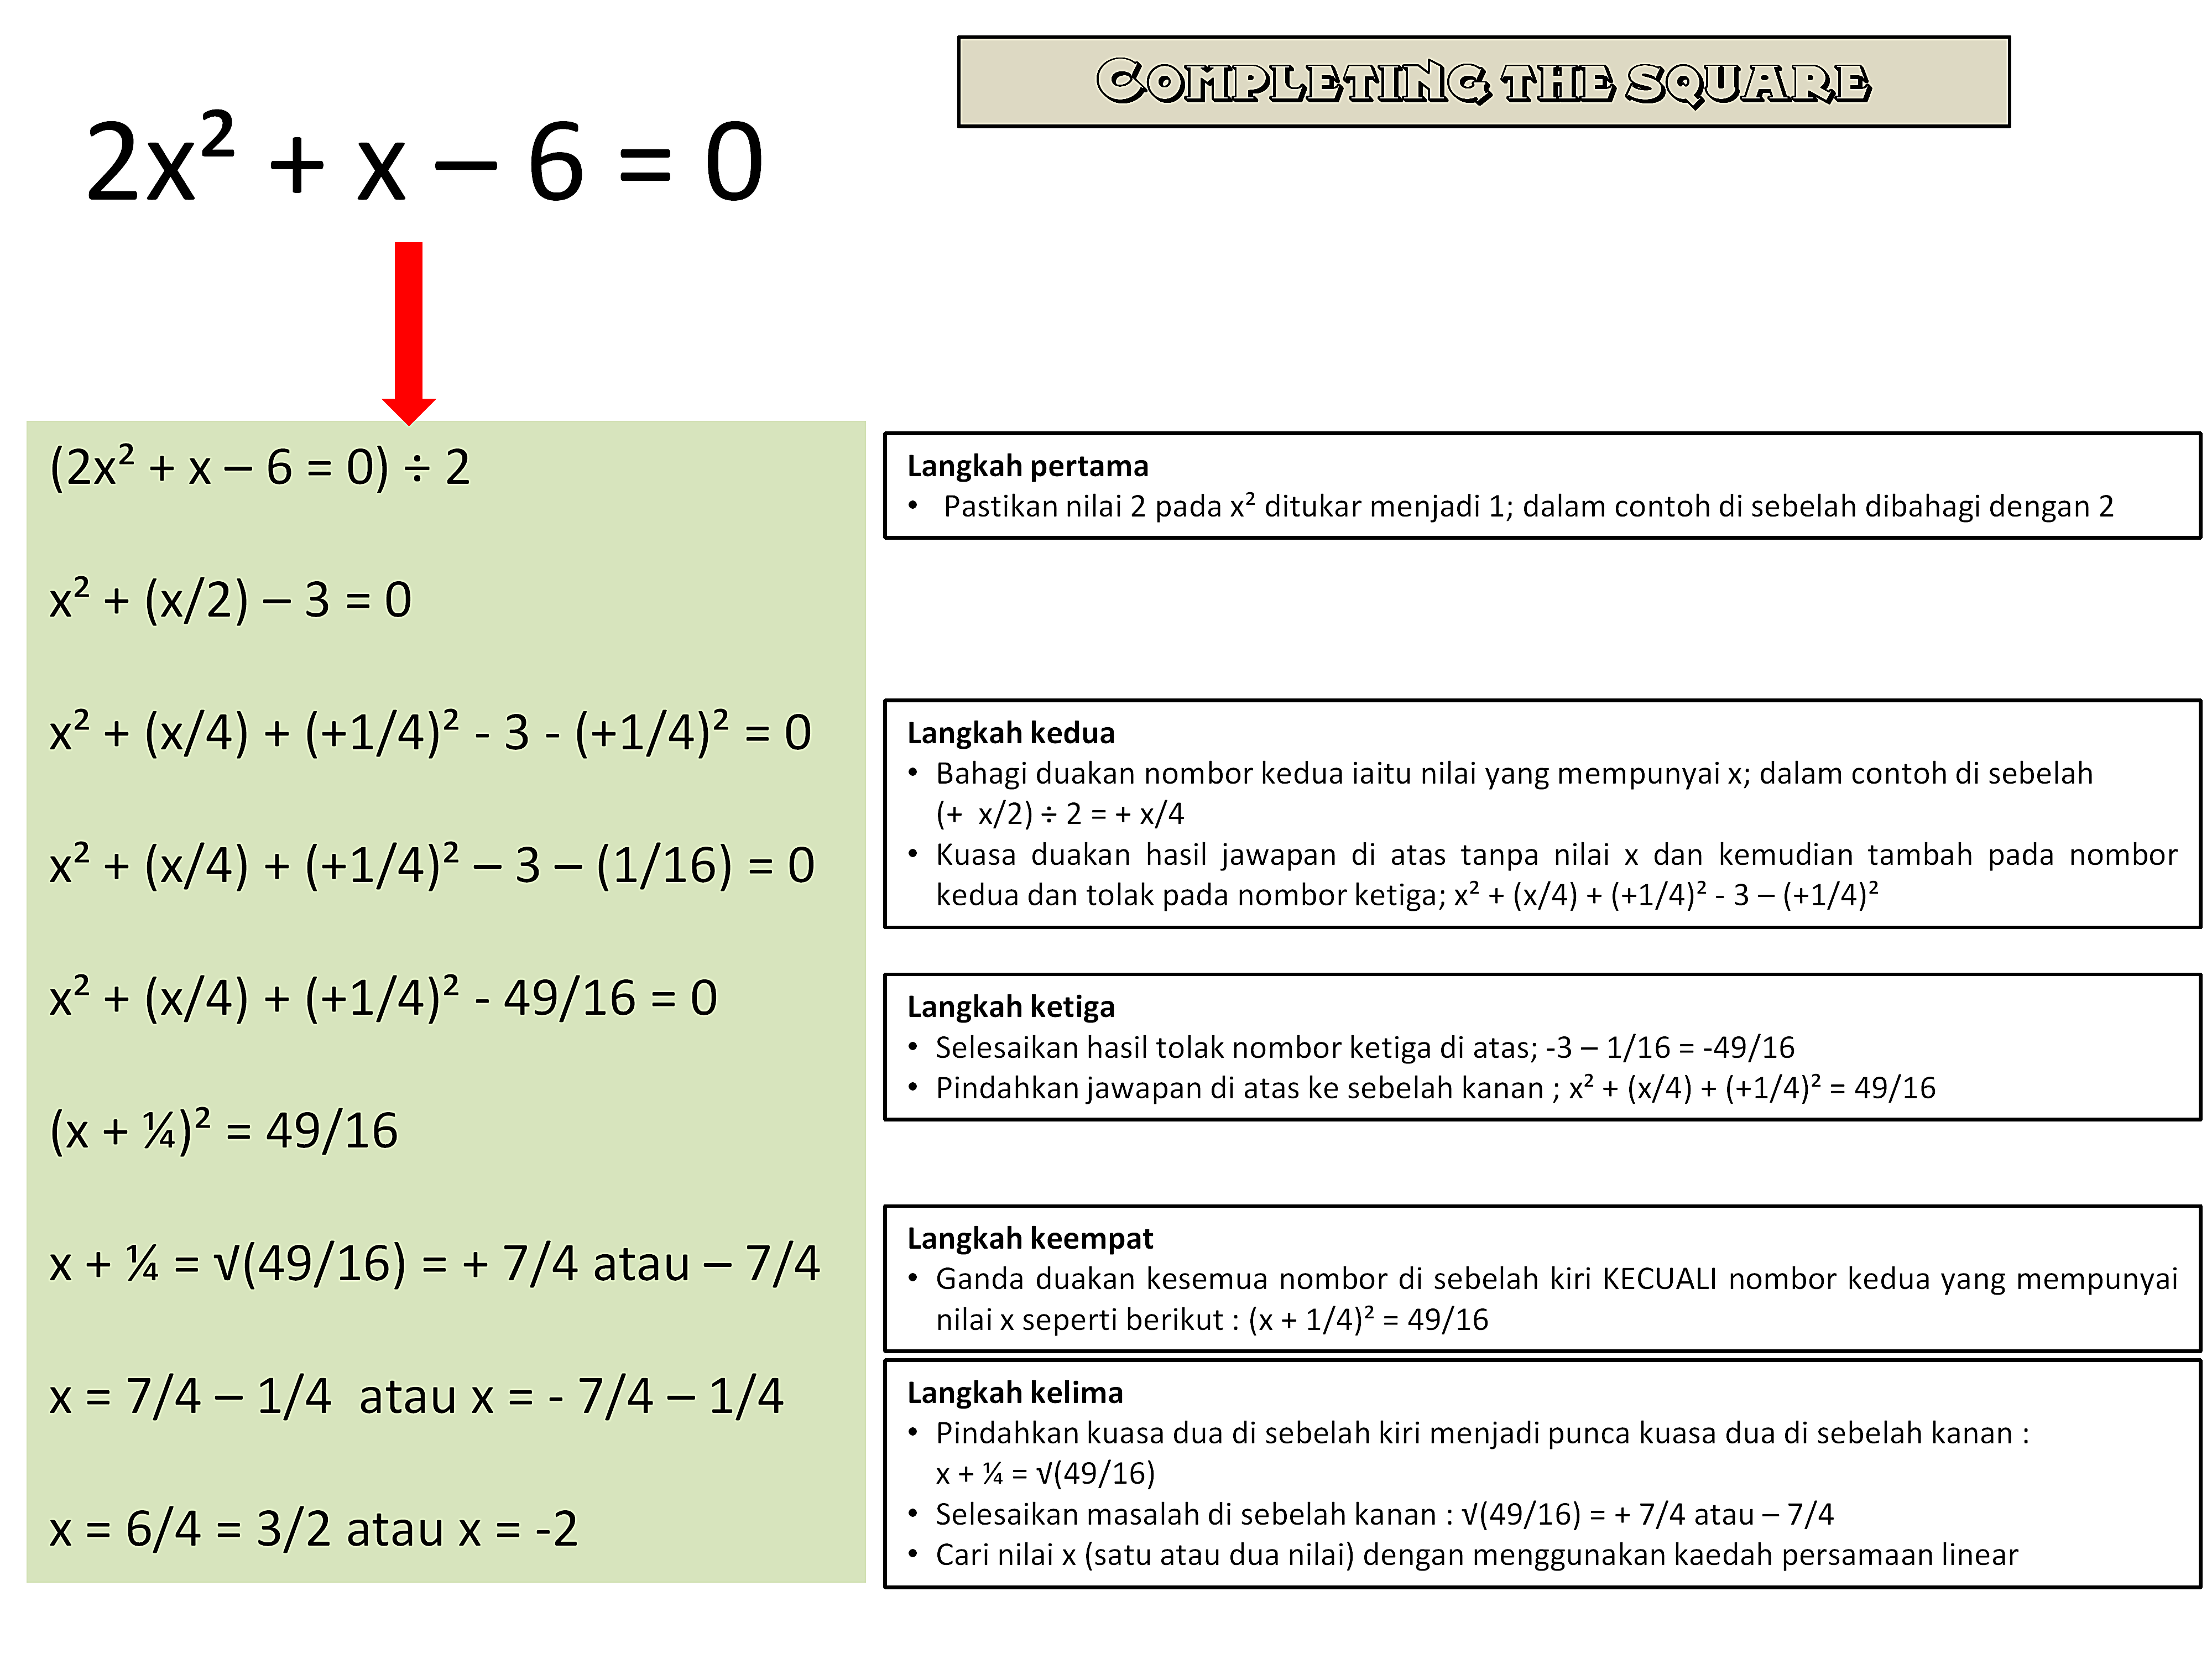 Form 4 Add Maths – finding the roots of equation 